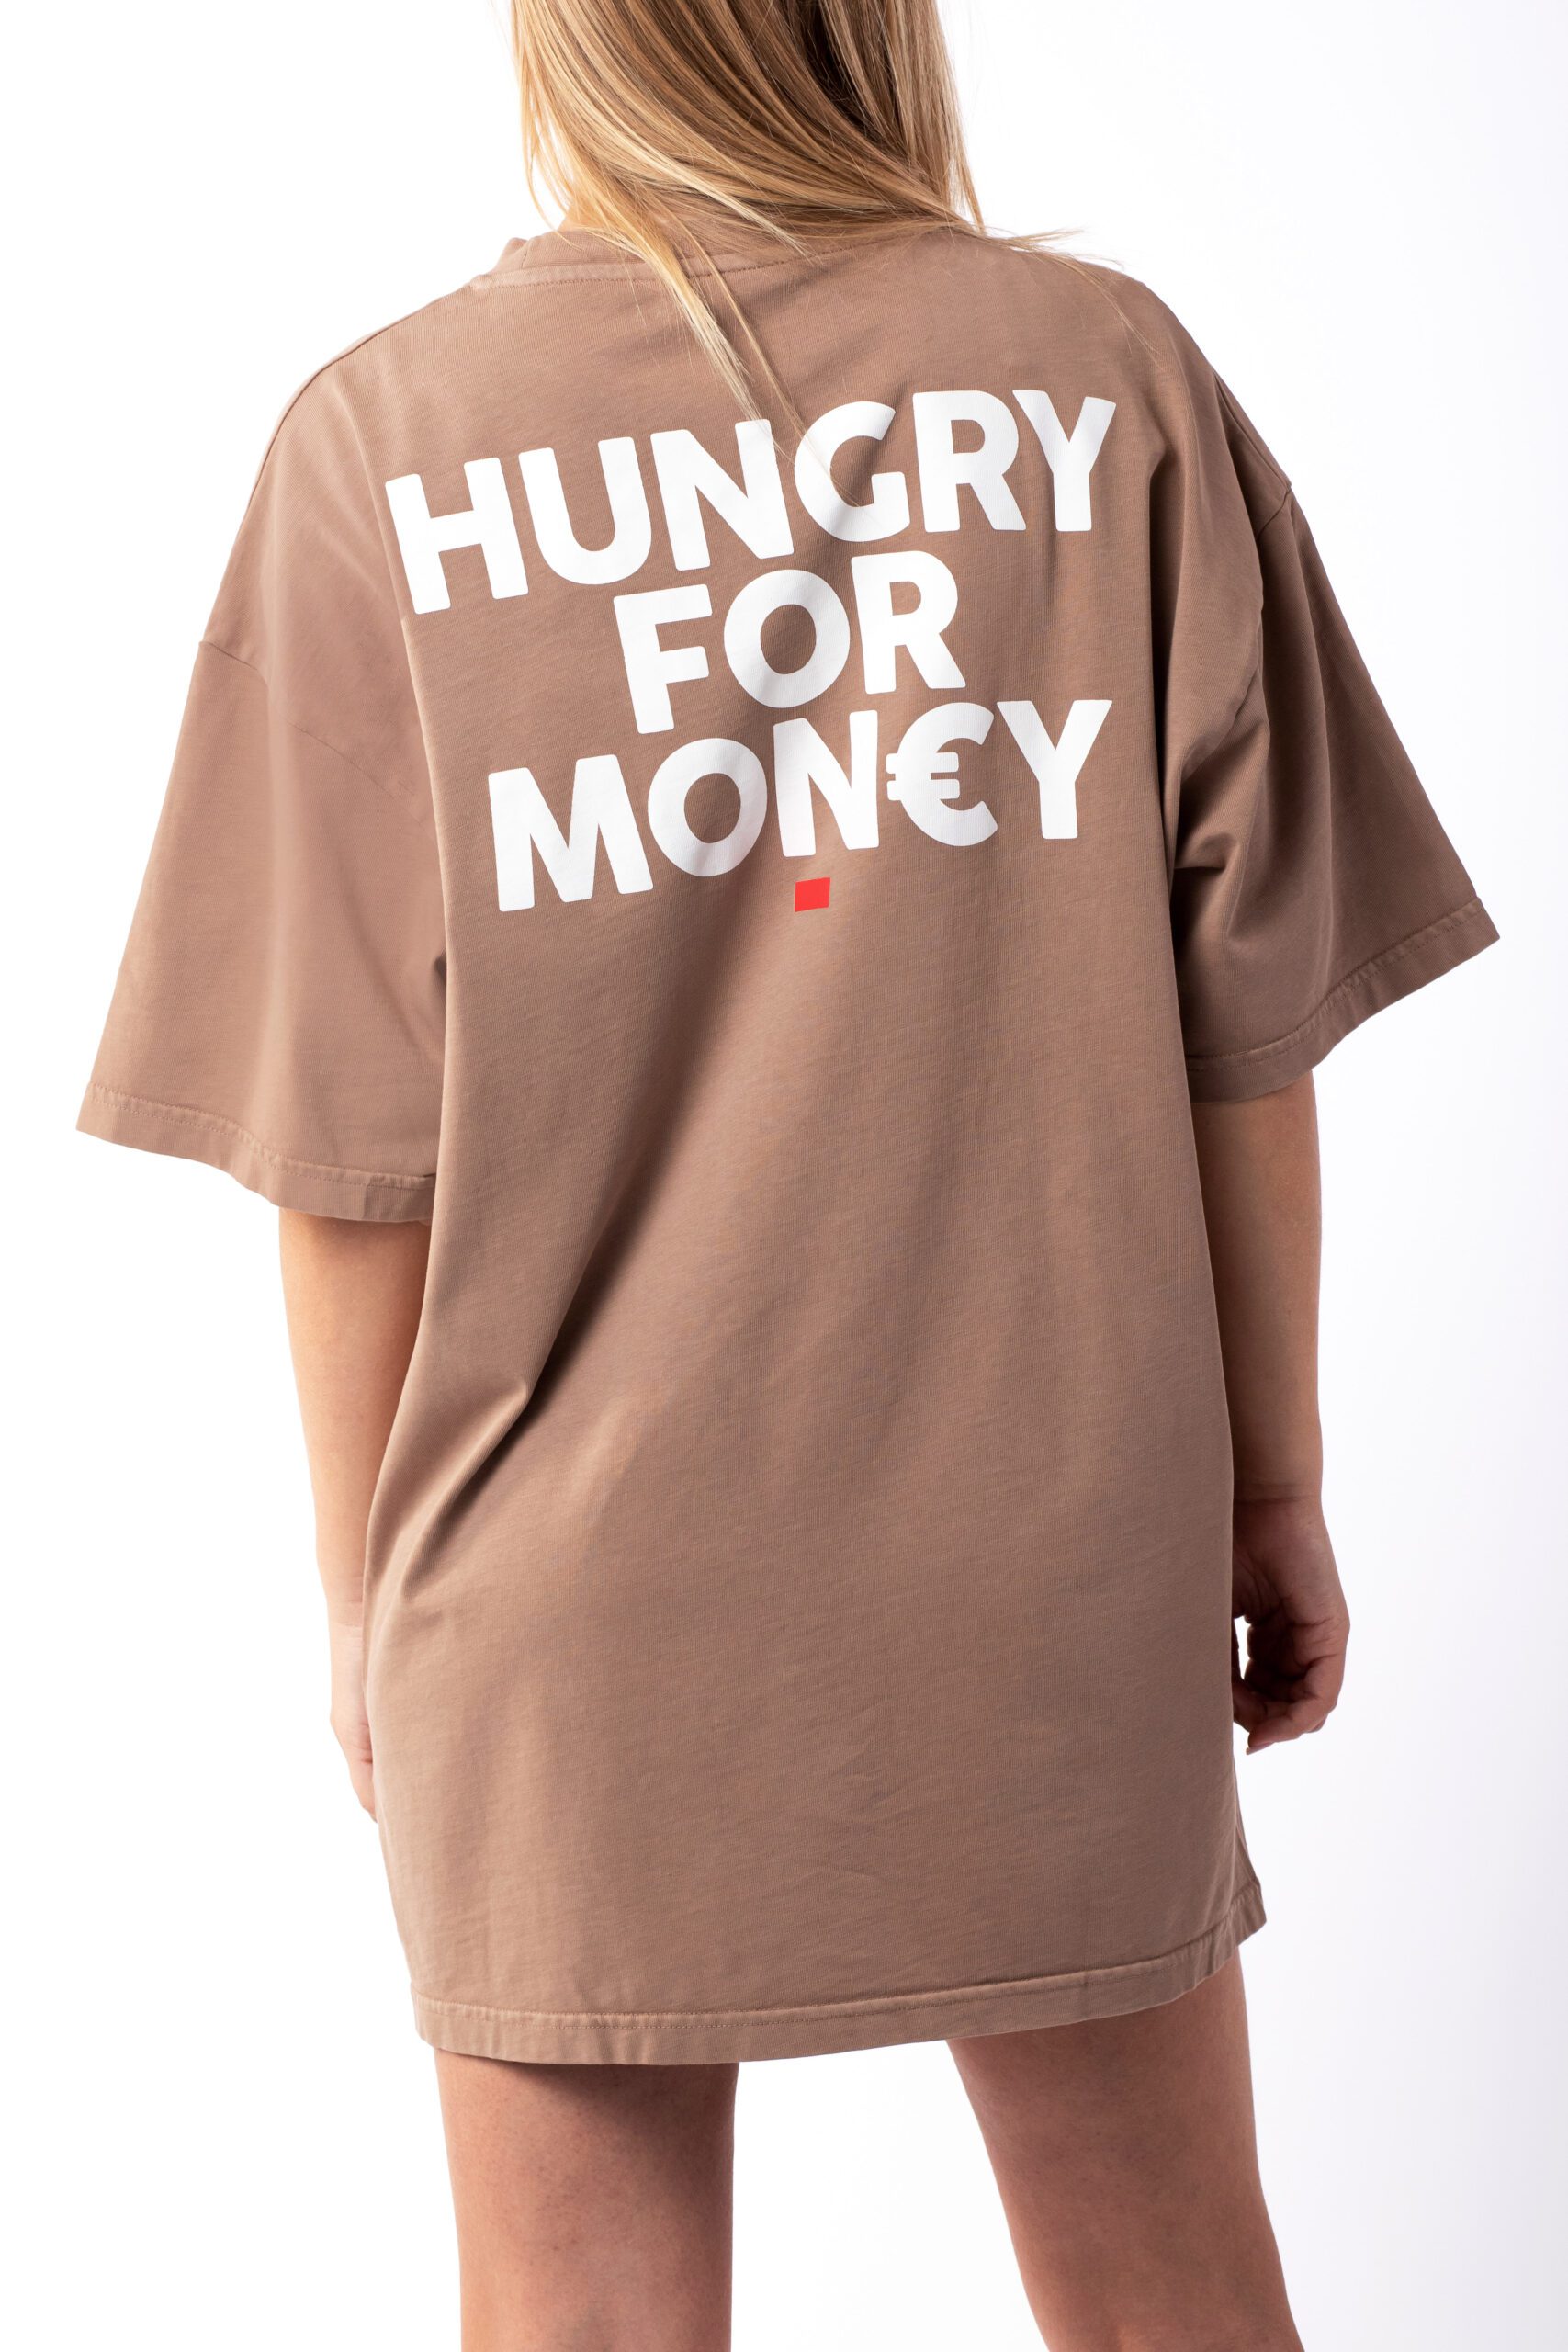 HUNGRY FOR MONEY